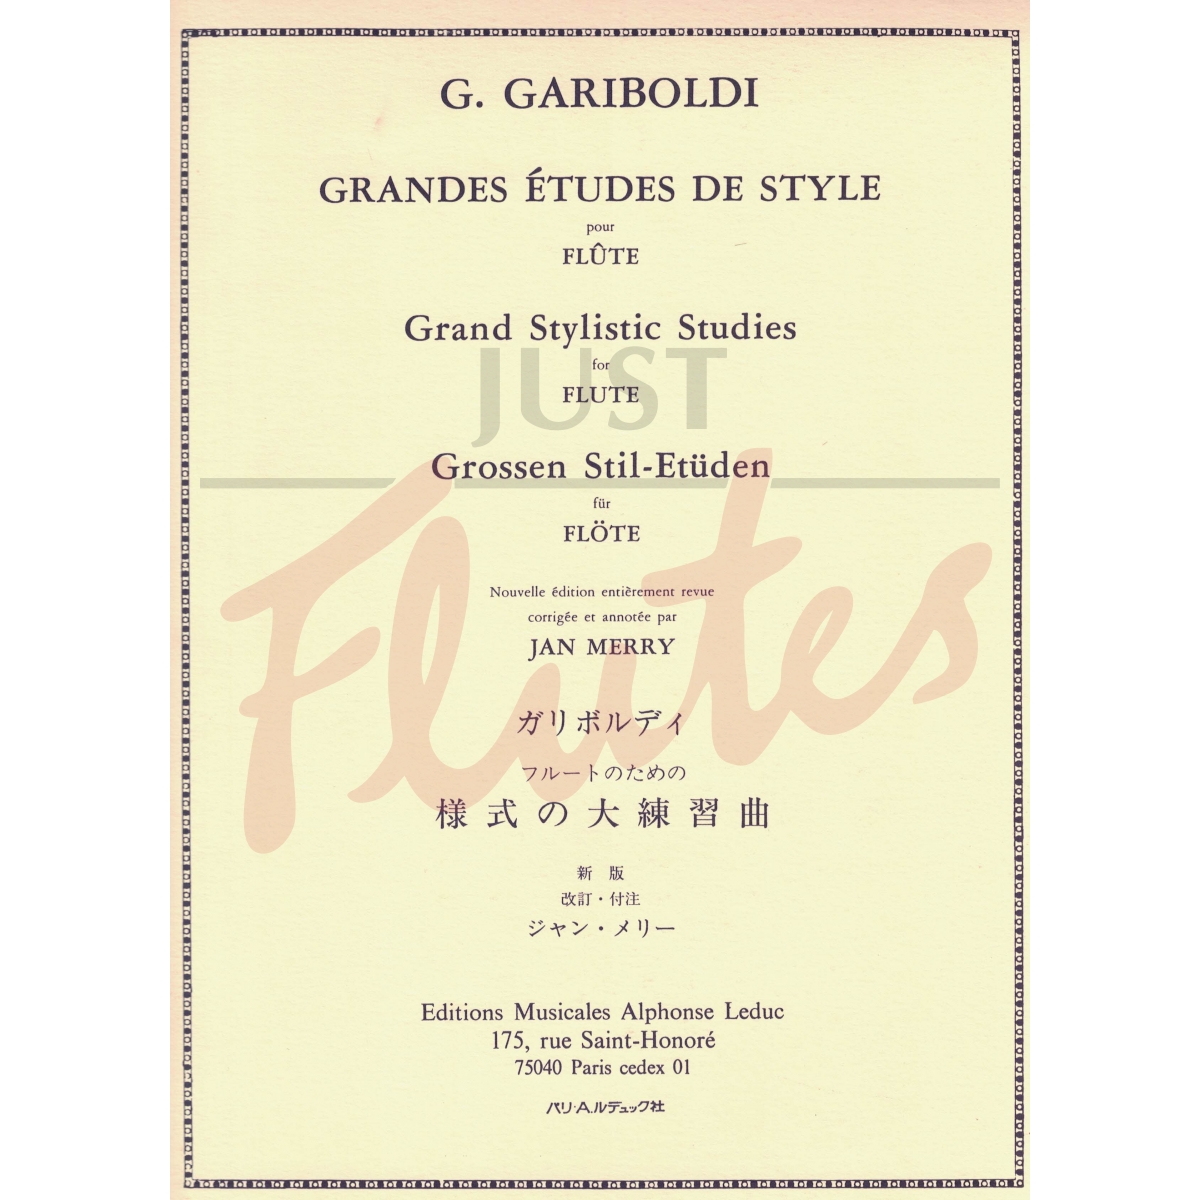 Grand Stylistic Studies for Flute